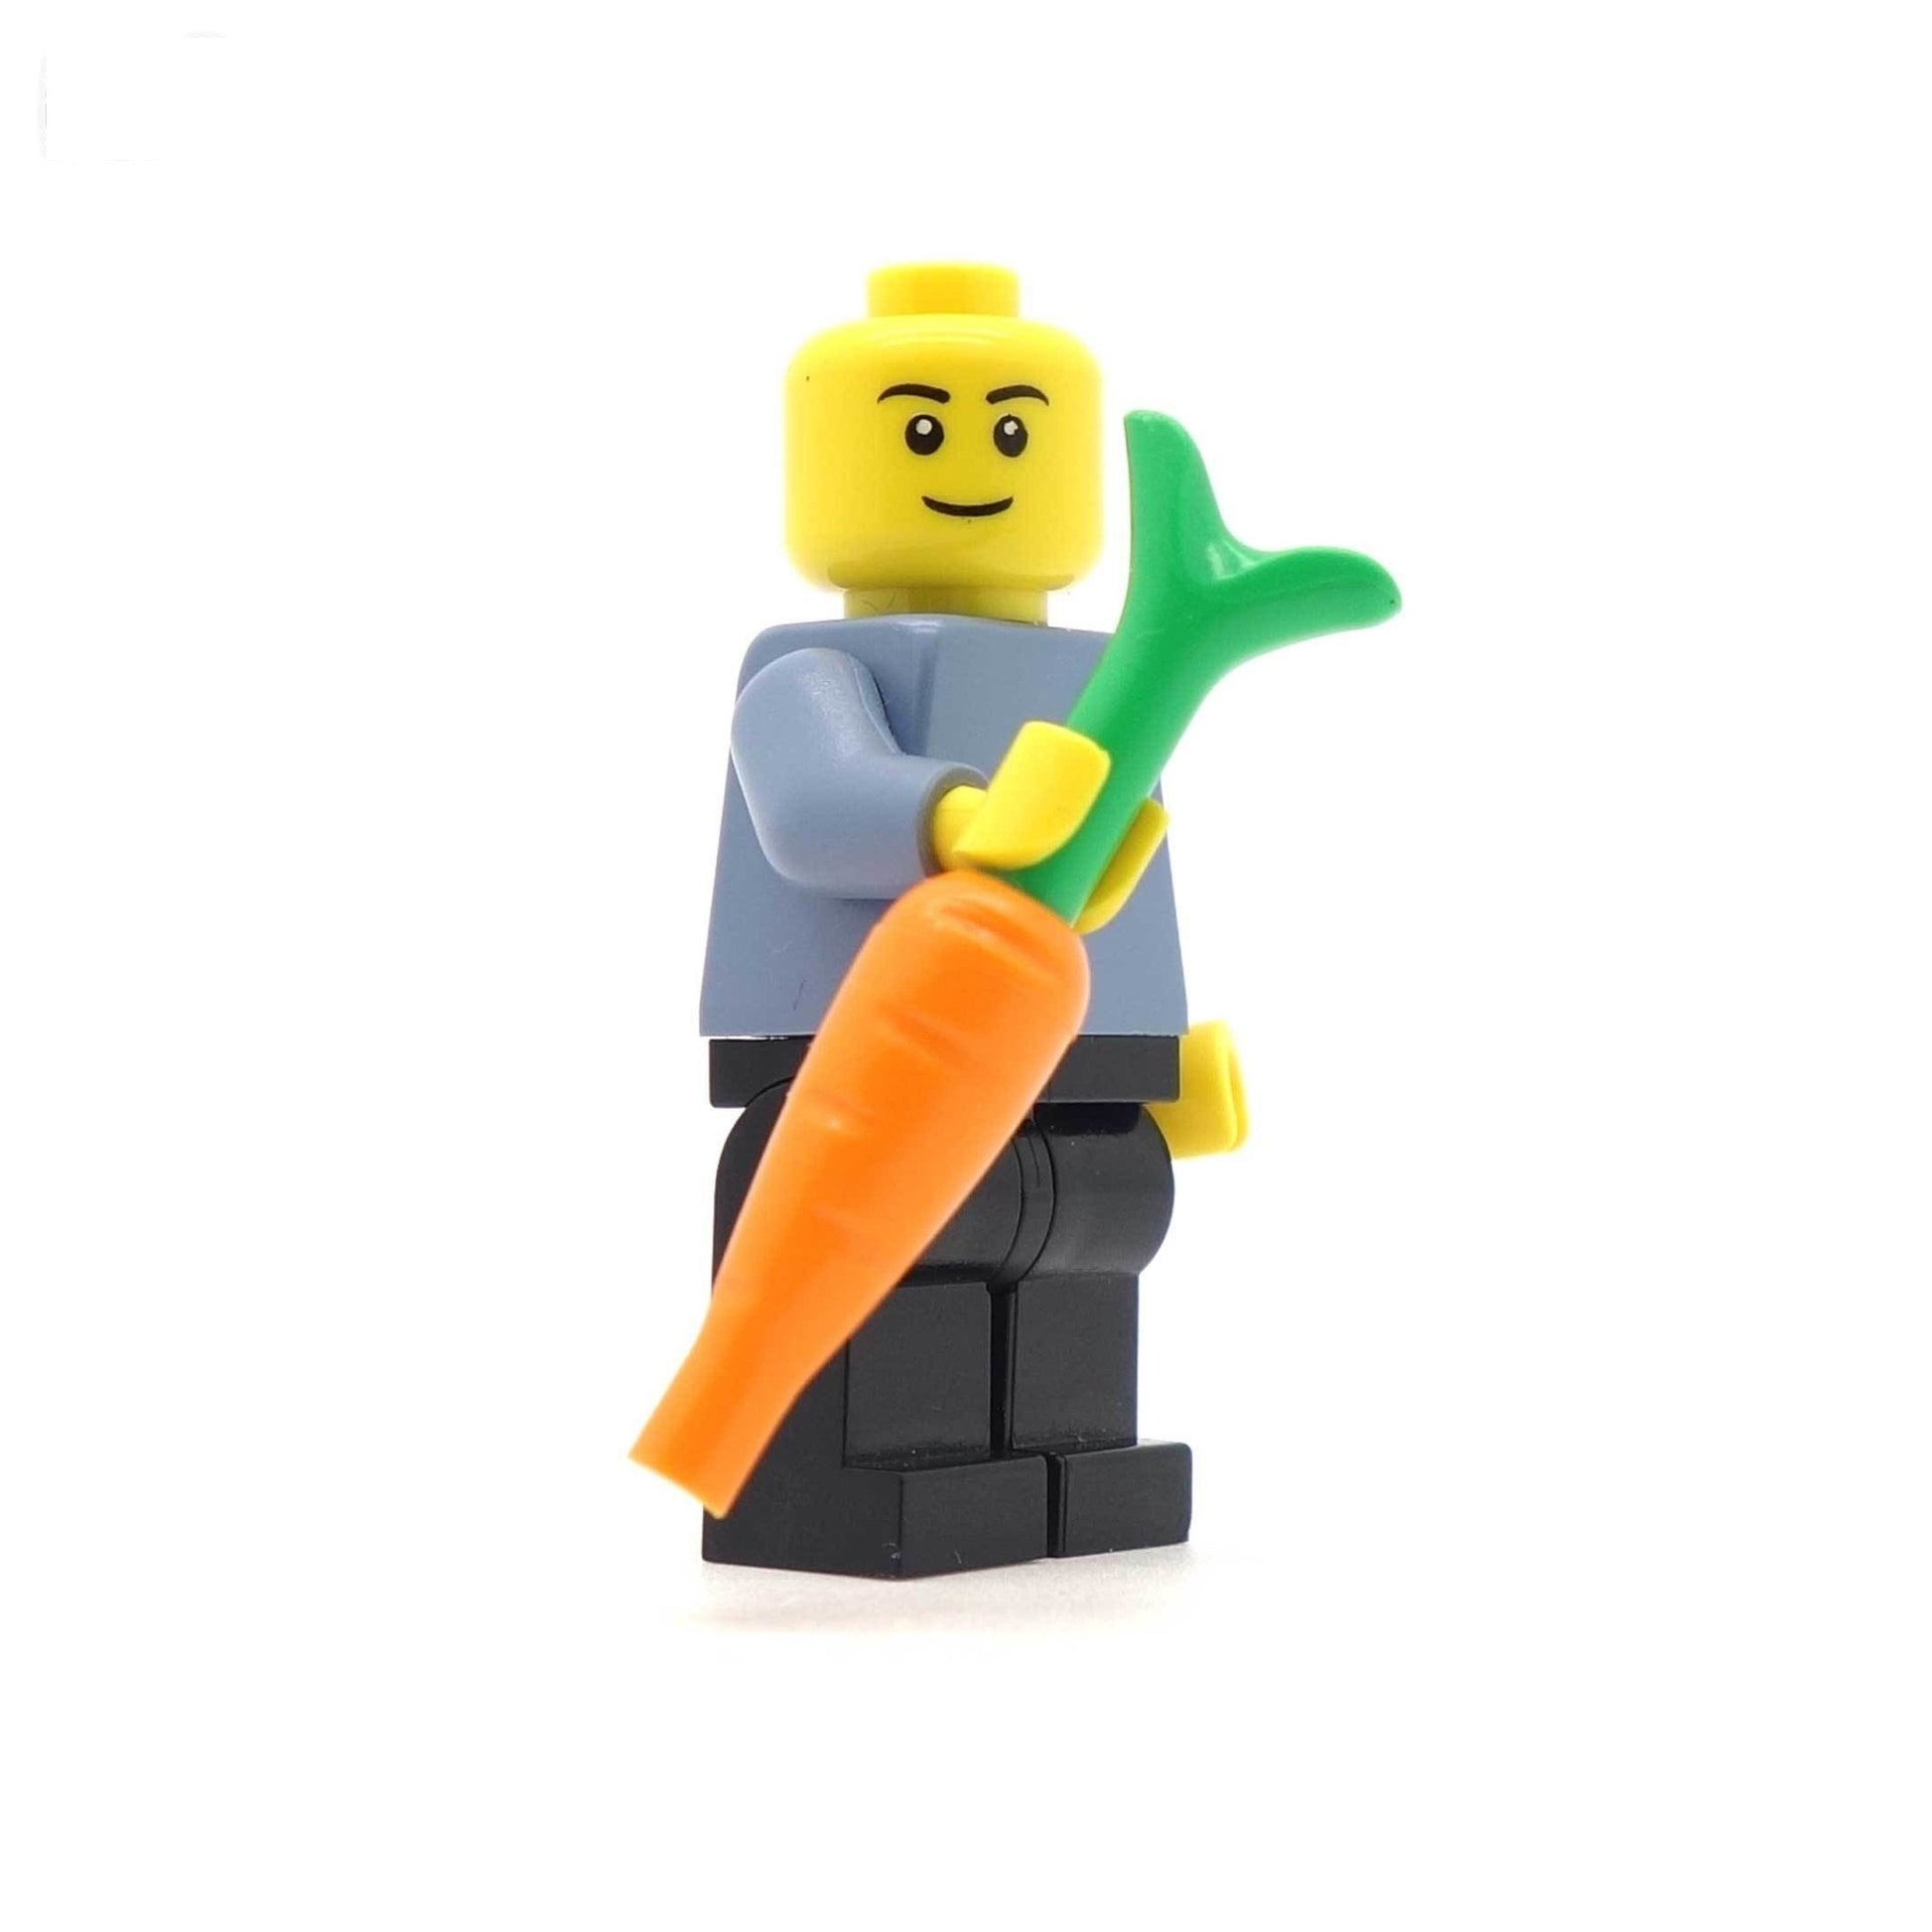 Minifig Holding LEGO Carrot